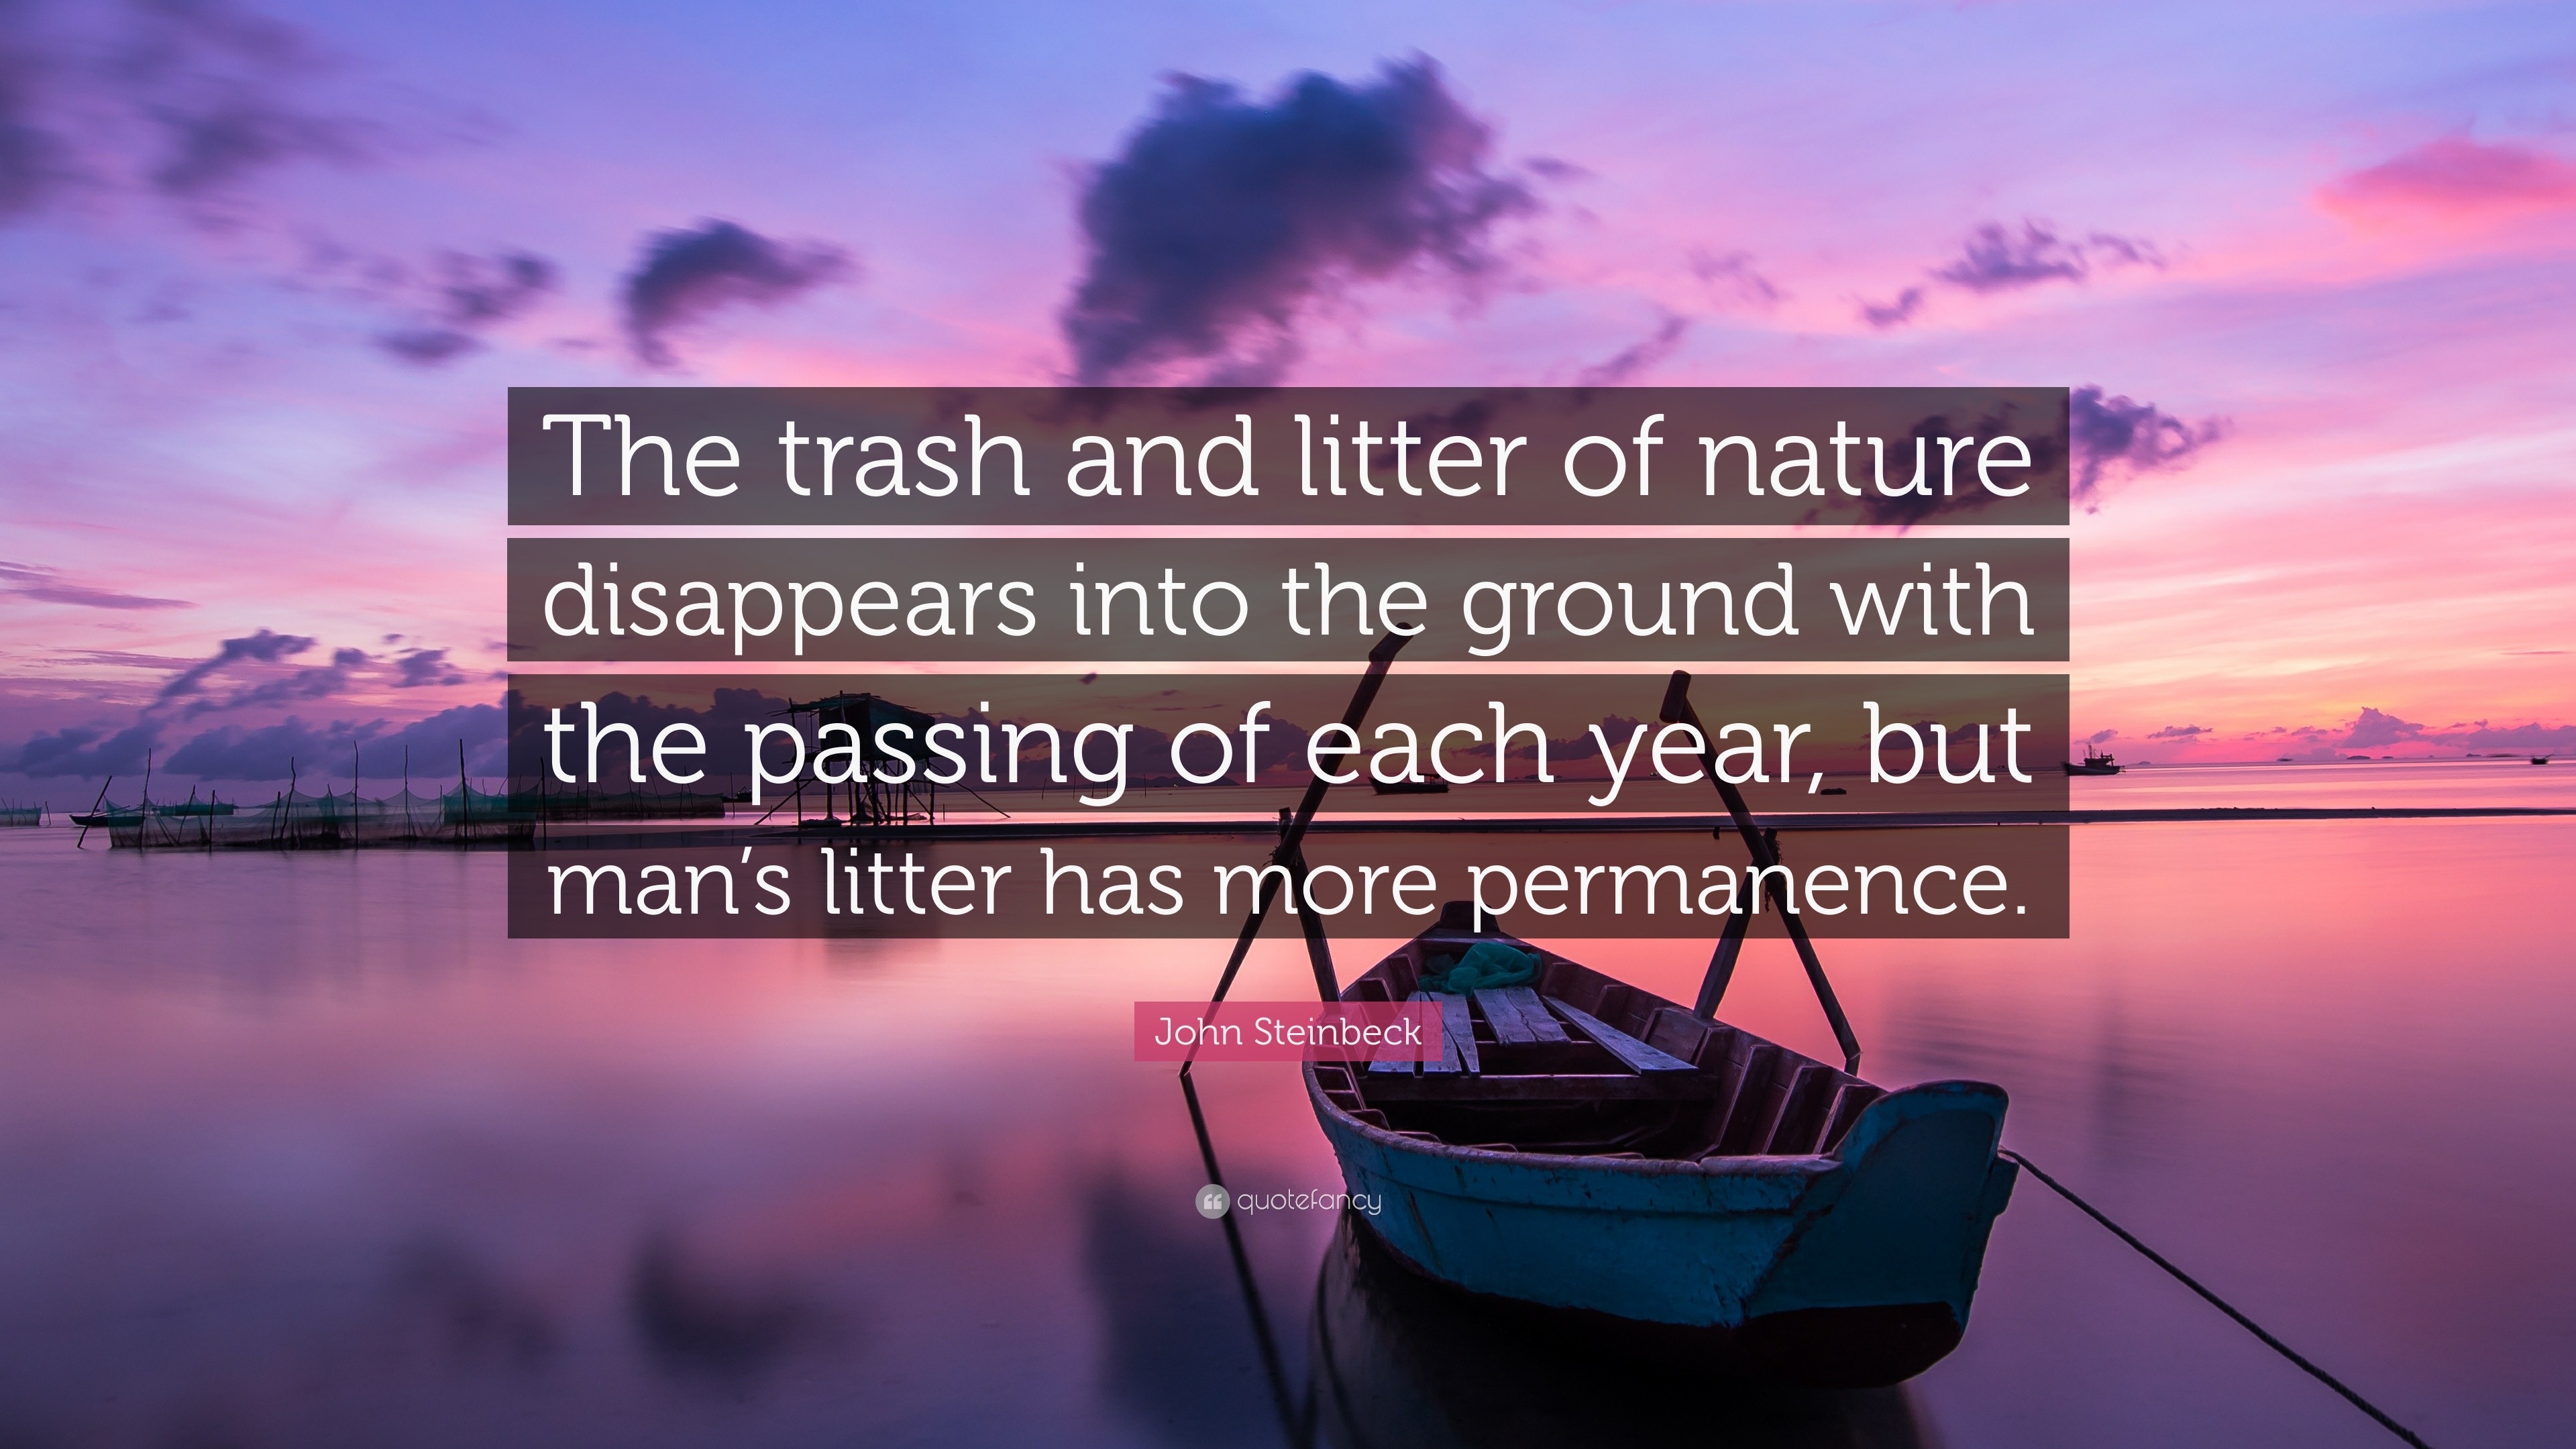 John Steinbeck Quote: "The trash and litter of nature disappears into the ground with the ...